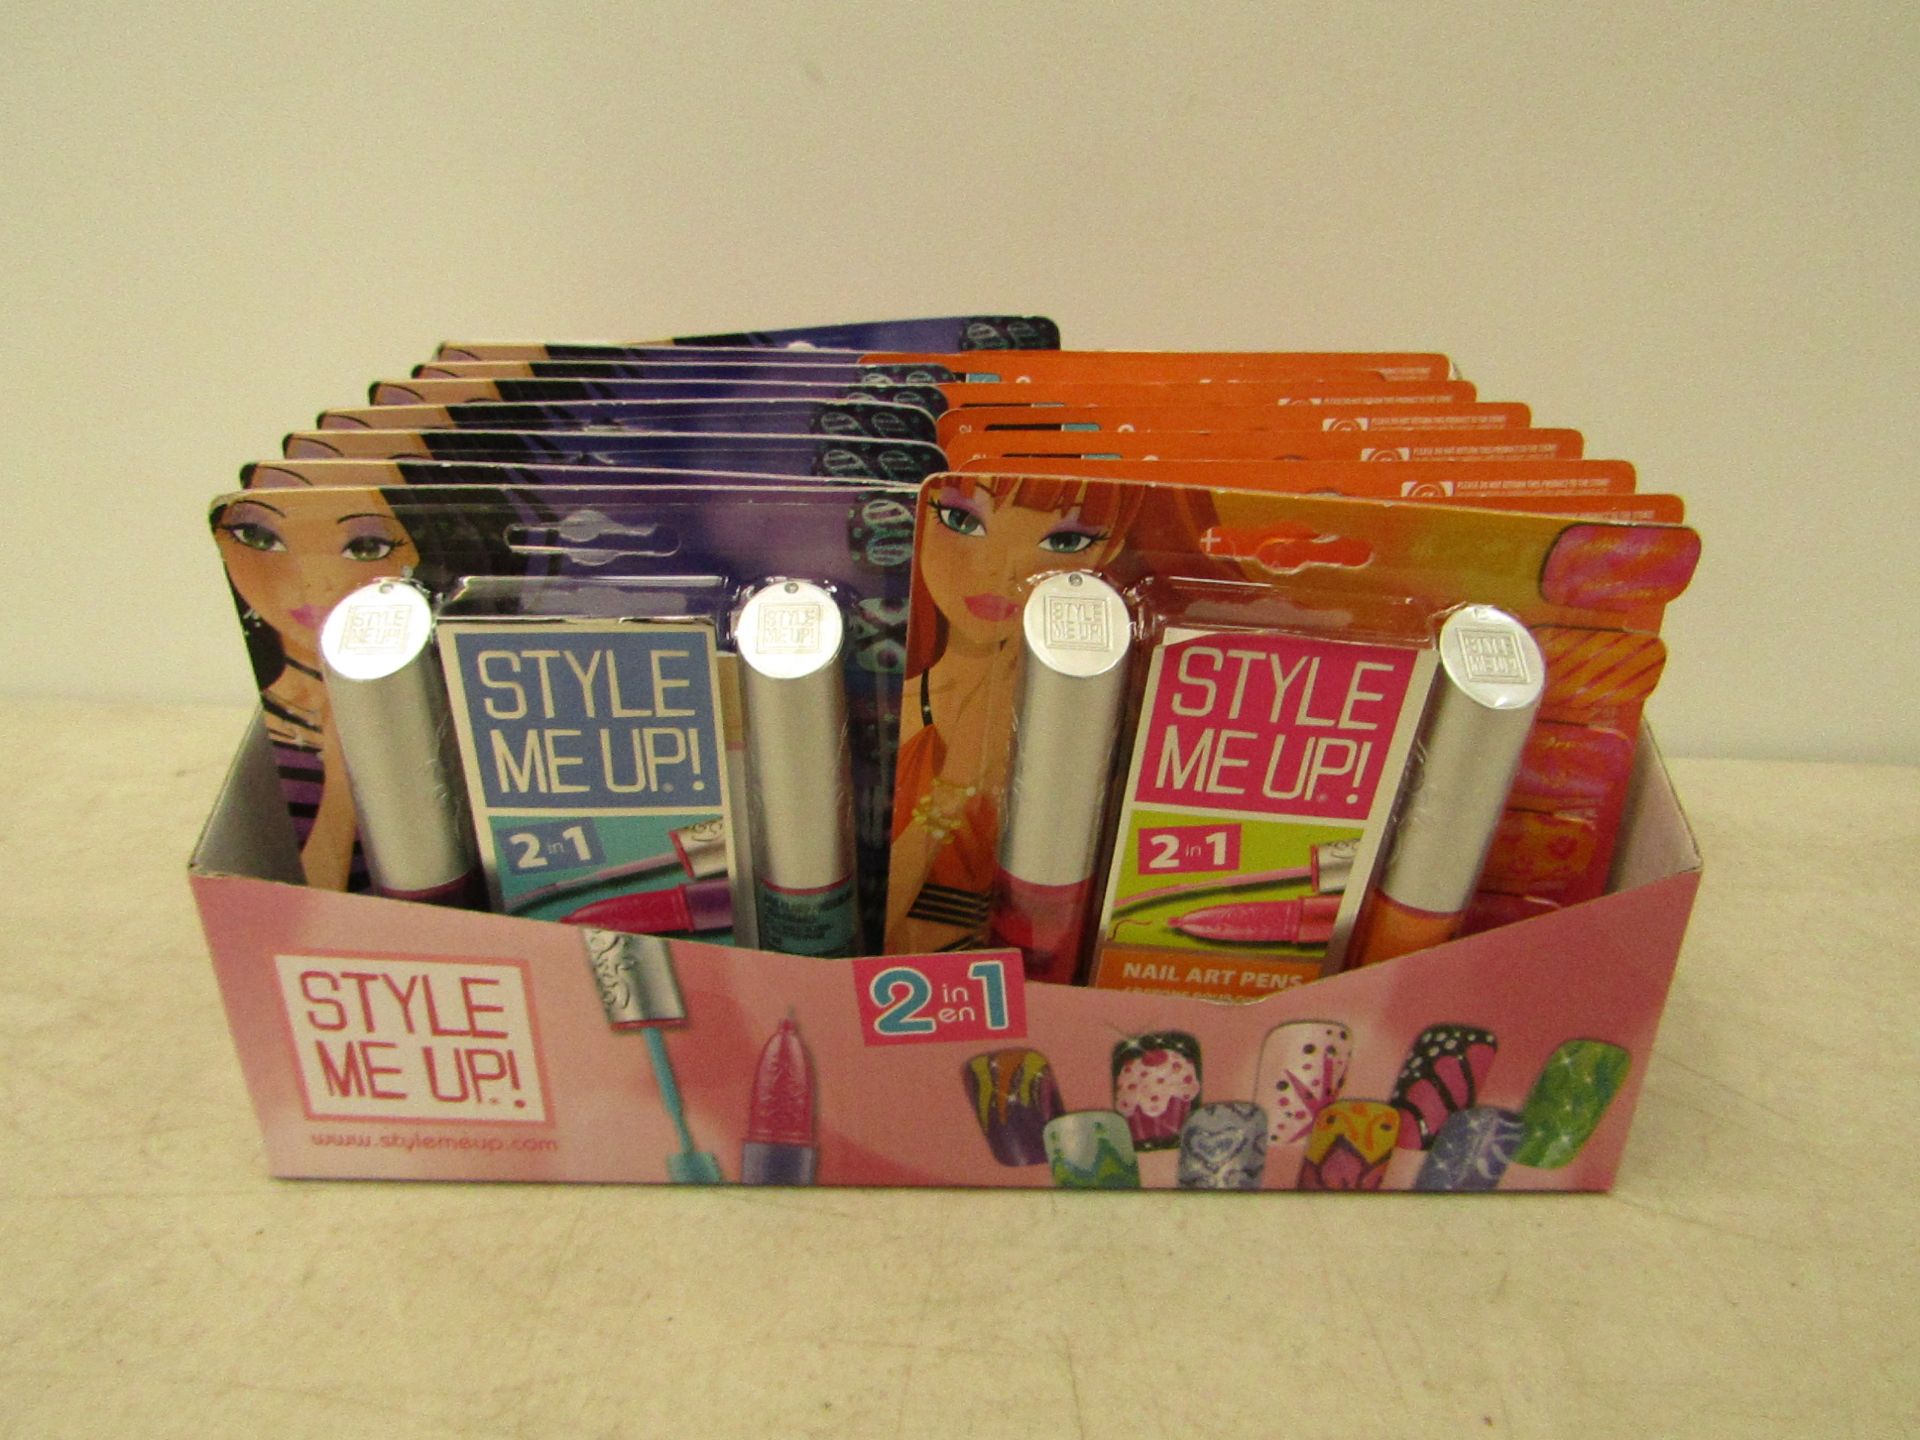 Box of 16 Style me up 2 in 1 Nail art Pen sets, new, Best before 6 months after opening!!!